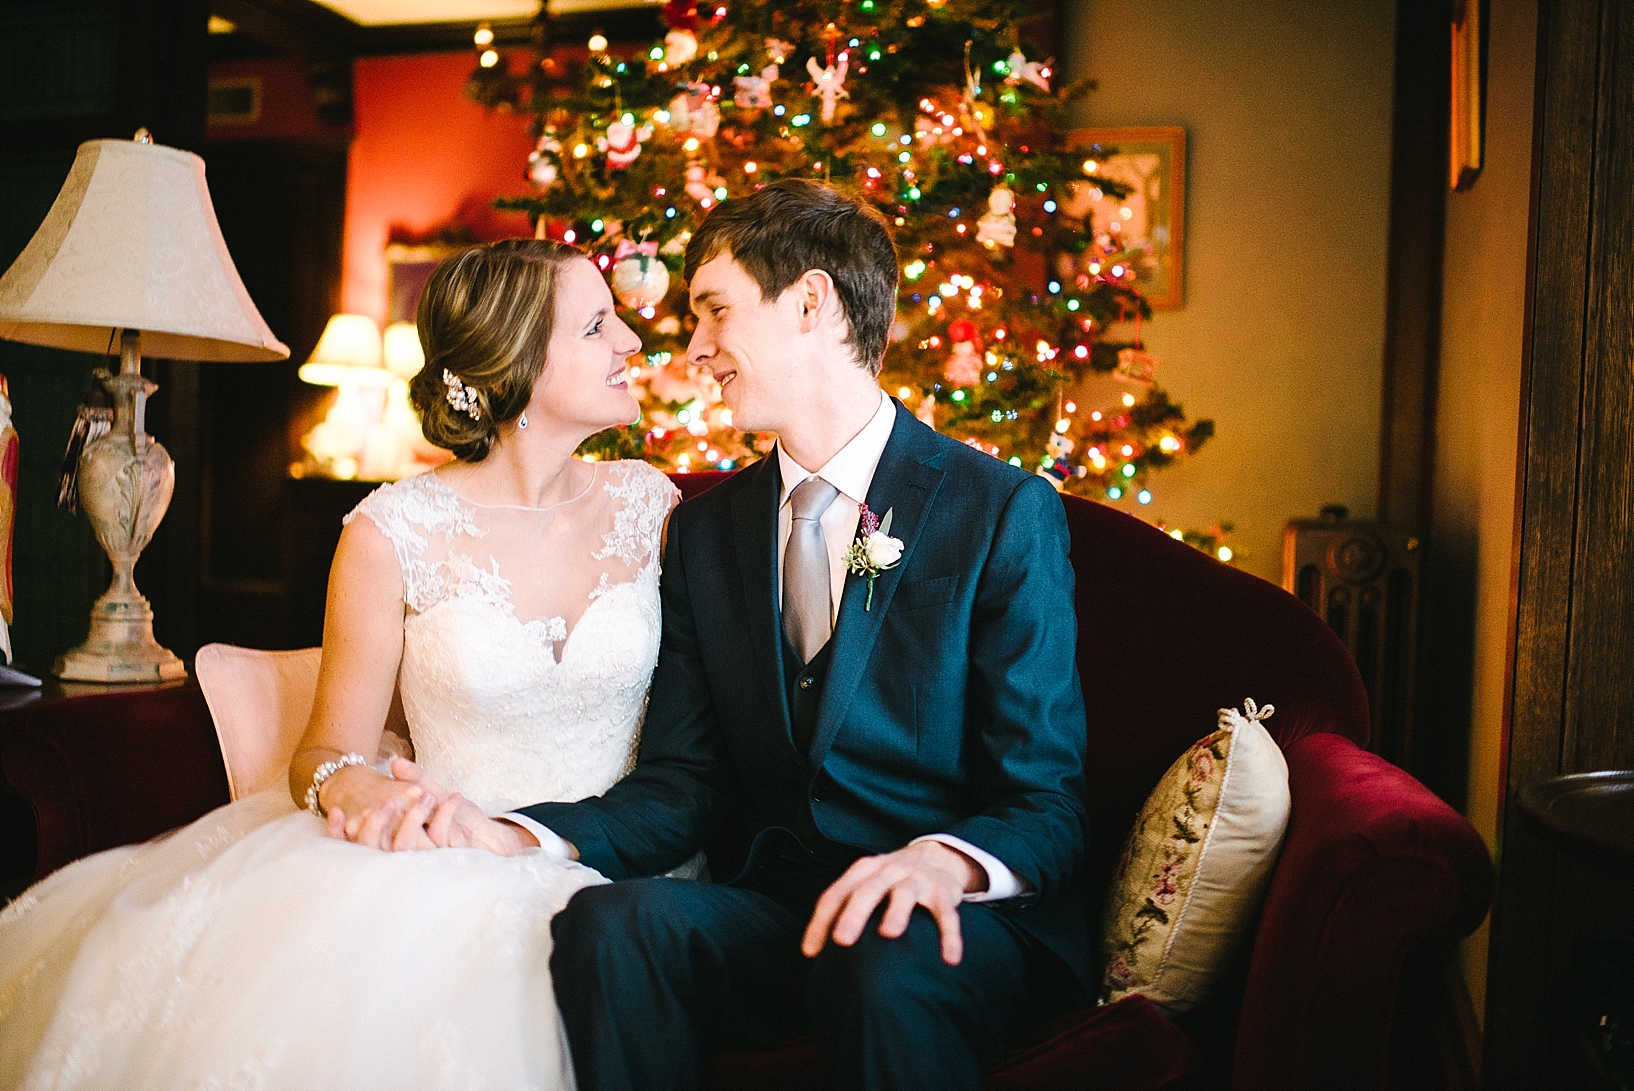 bride and groom sitting on couch in front of Christmas tree smiling at each other